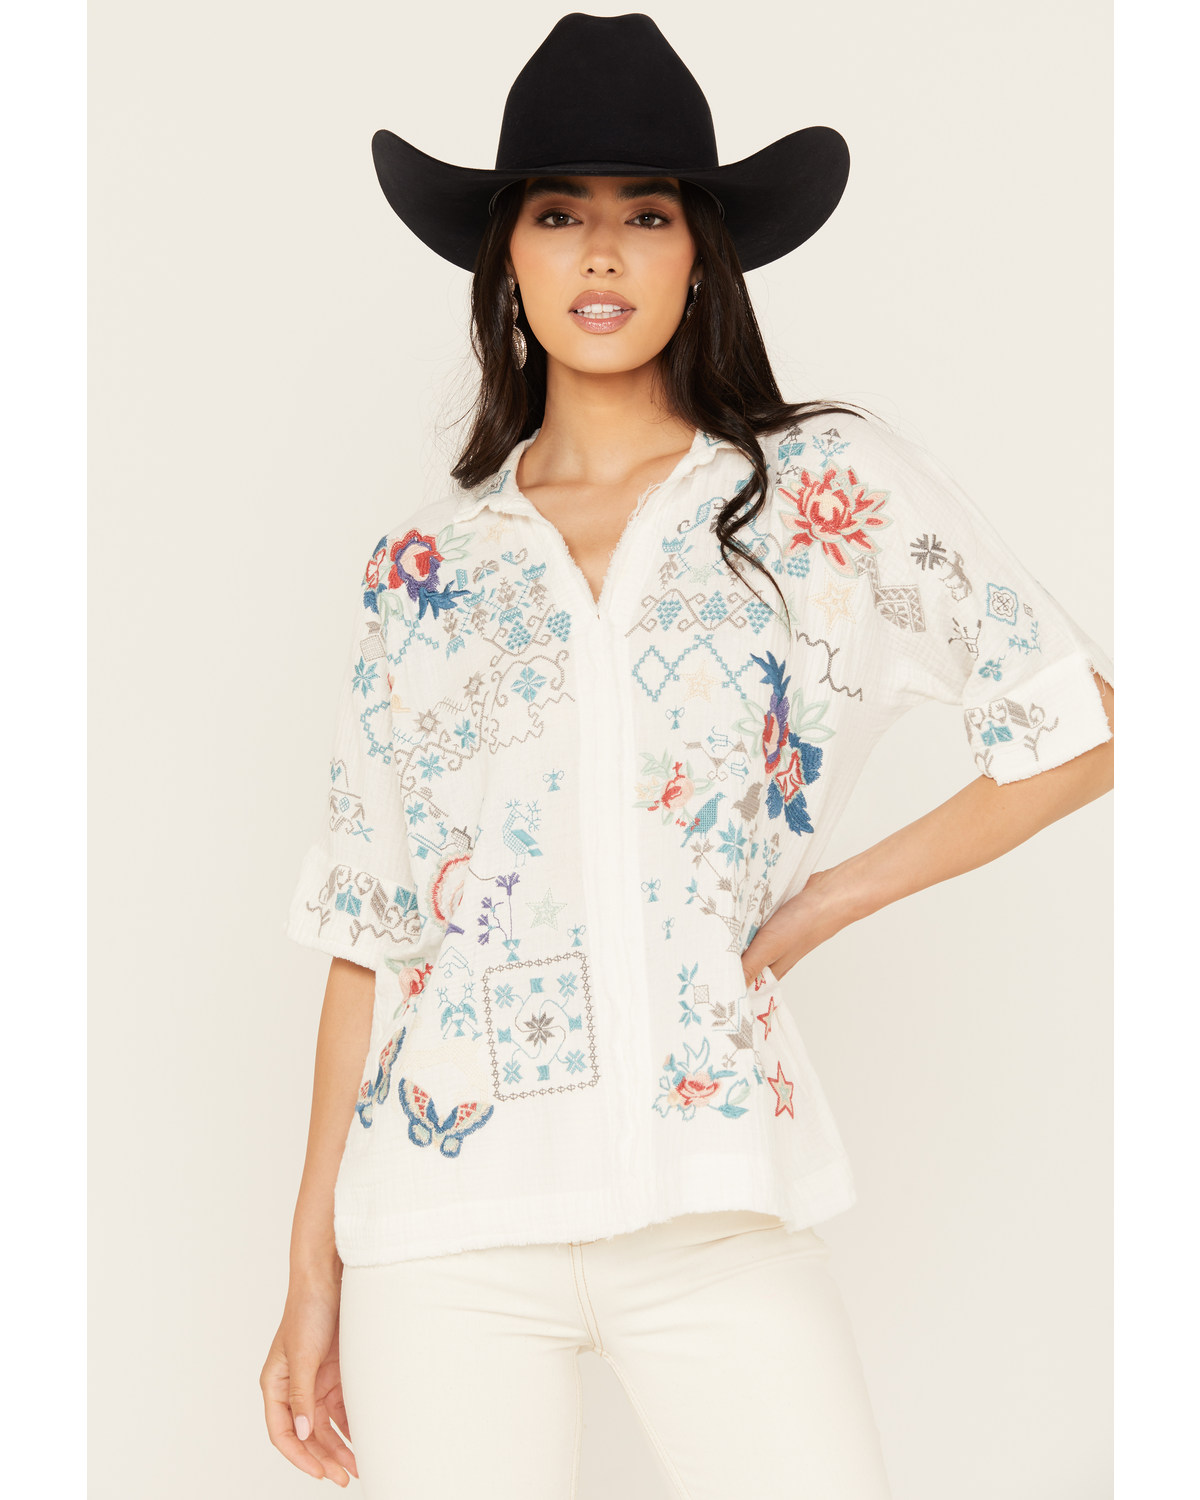 Johnny Was Women's Embroidered Short Sleeve Wodeleah Blouse